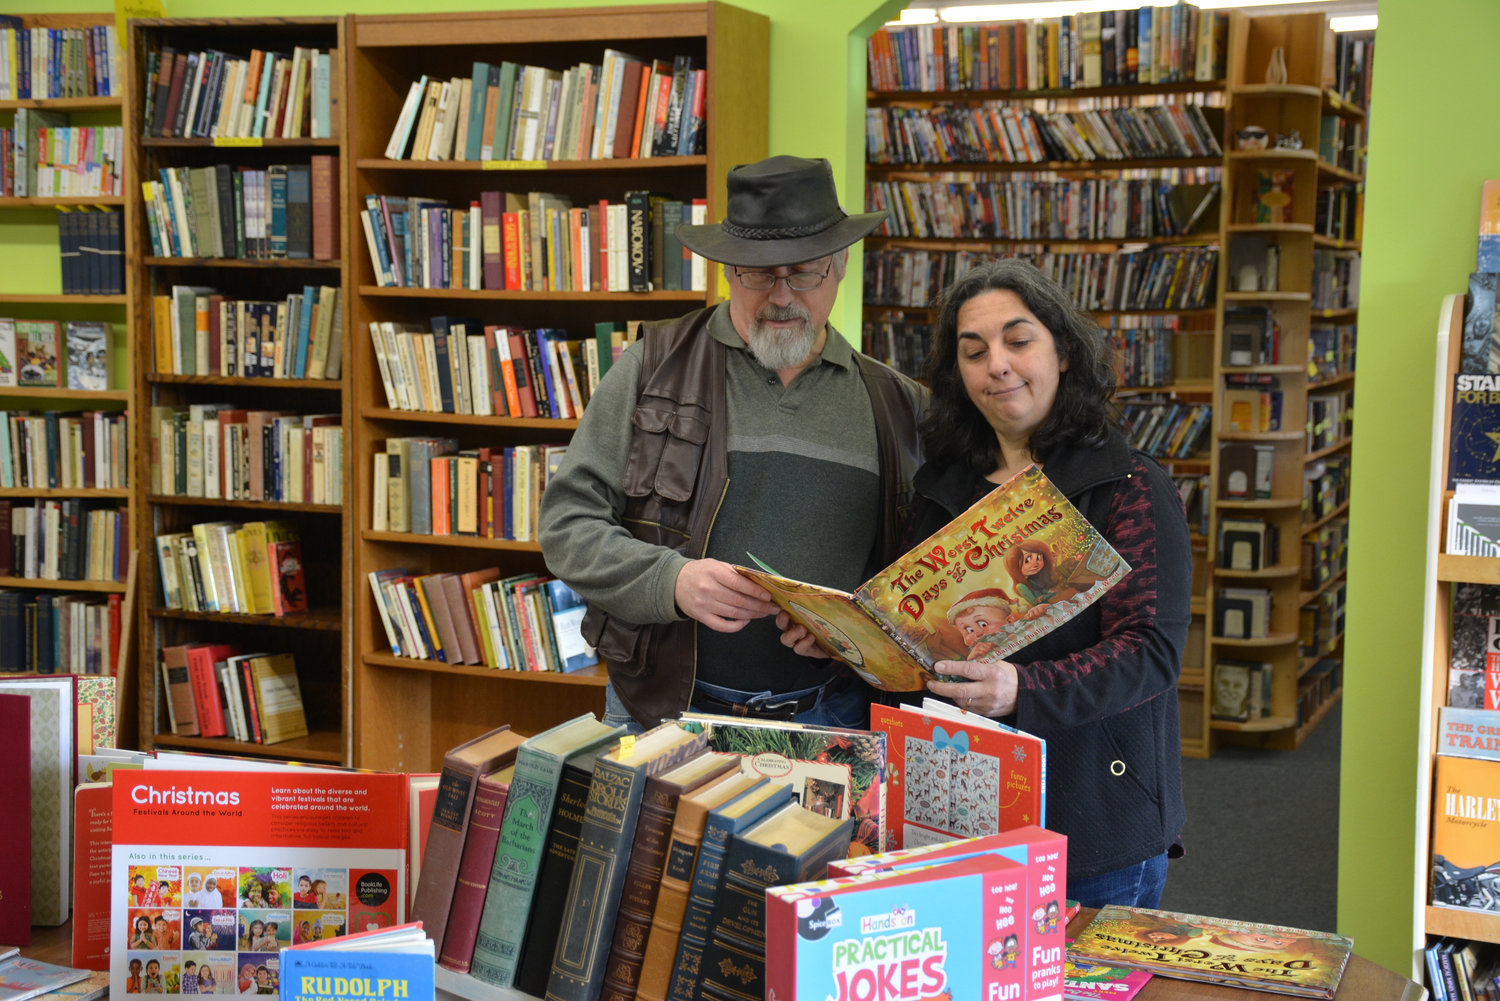 Janice Maddox reads a Christmas book to her husband, Robert, in their newly expanded bookstore.